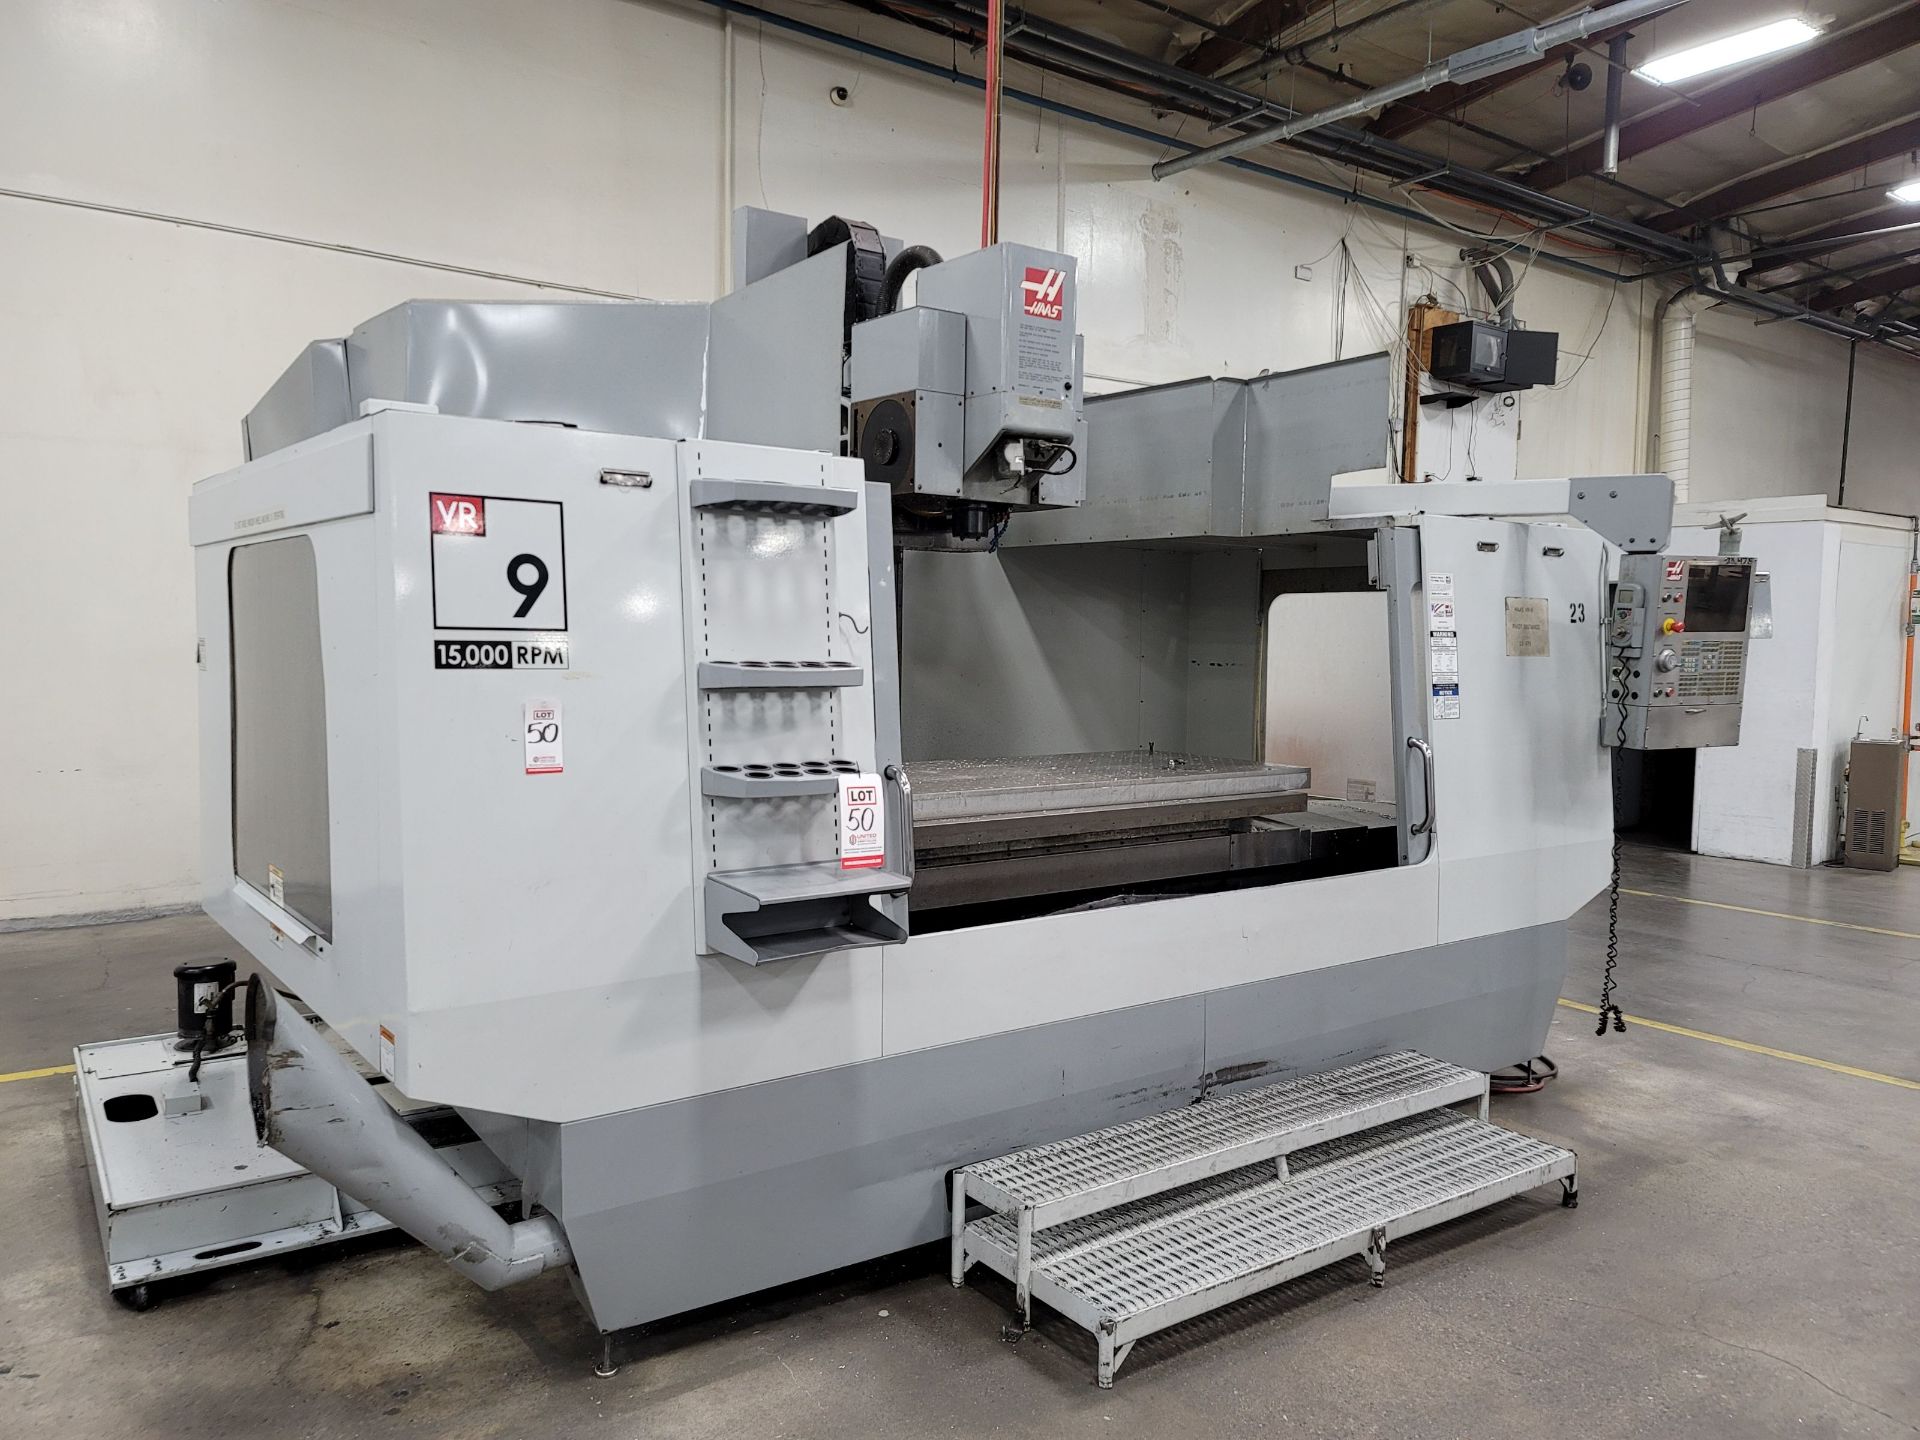 2006 HAAS VR-9 VERTICAL MACHINING CENTER, 5-AXIS ARTICULATING HEAD, XYZ TRAVELS: 84" X, 40" Y, 30" - Image 2 of 17